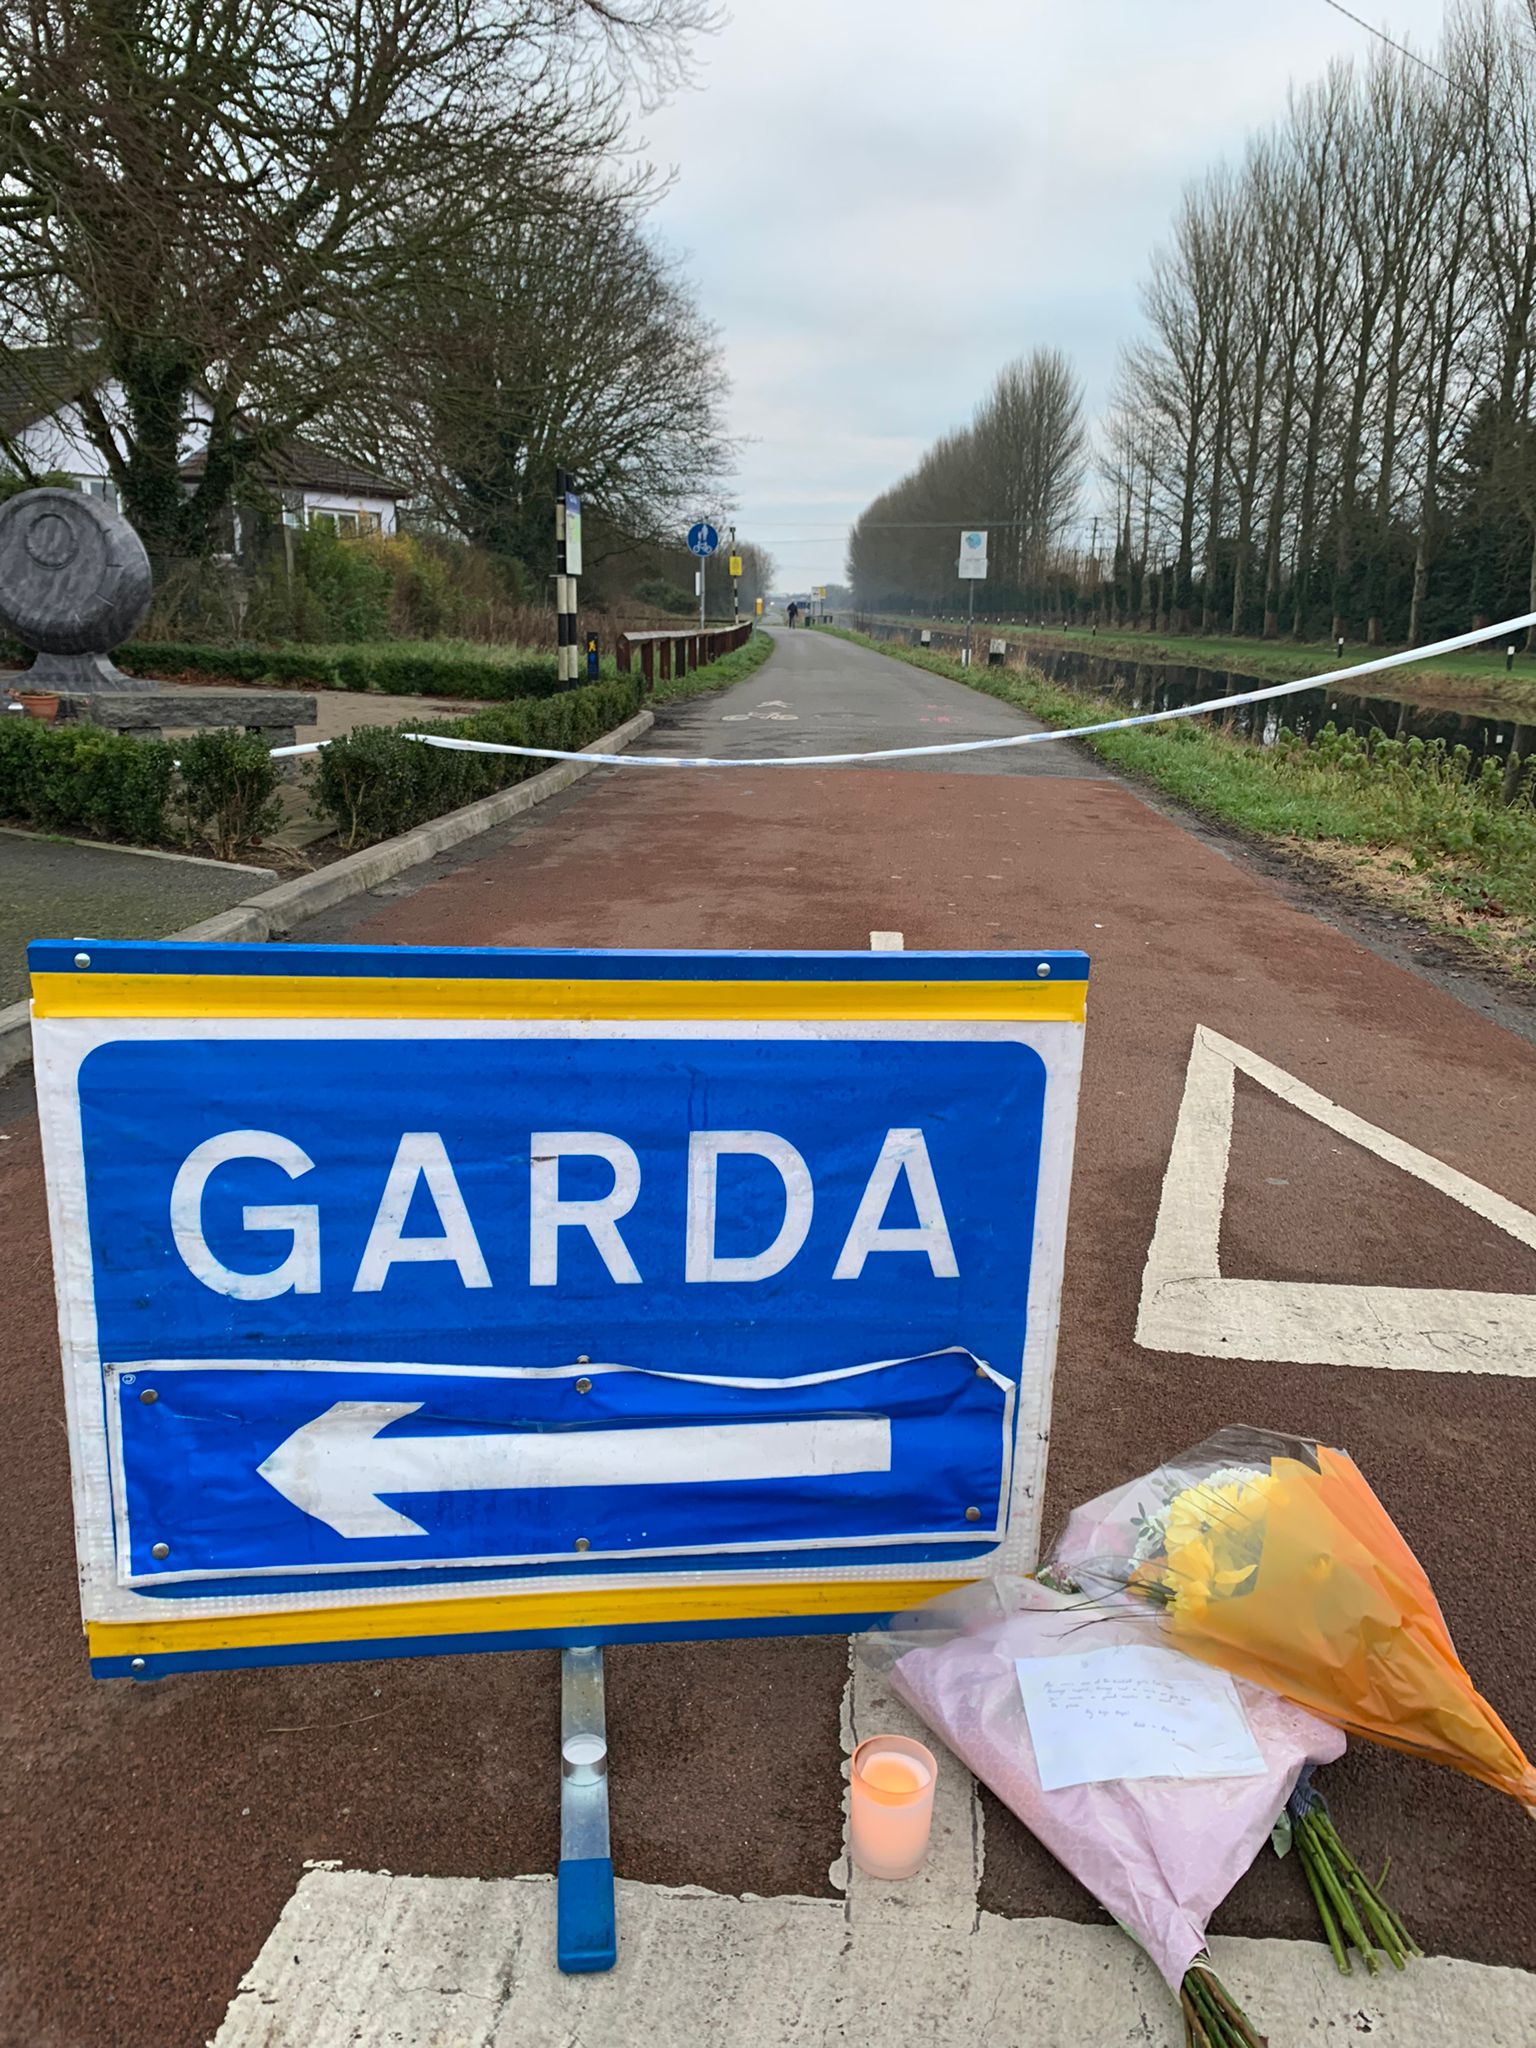 The scene of the attack on the Grand Canal near Tullamore, County Offaly. Image: Stephen Murphy/Newstalk 